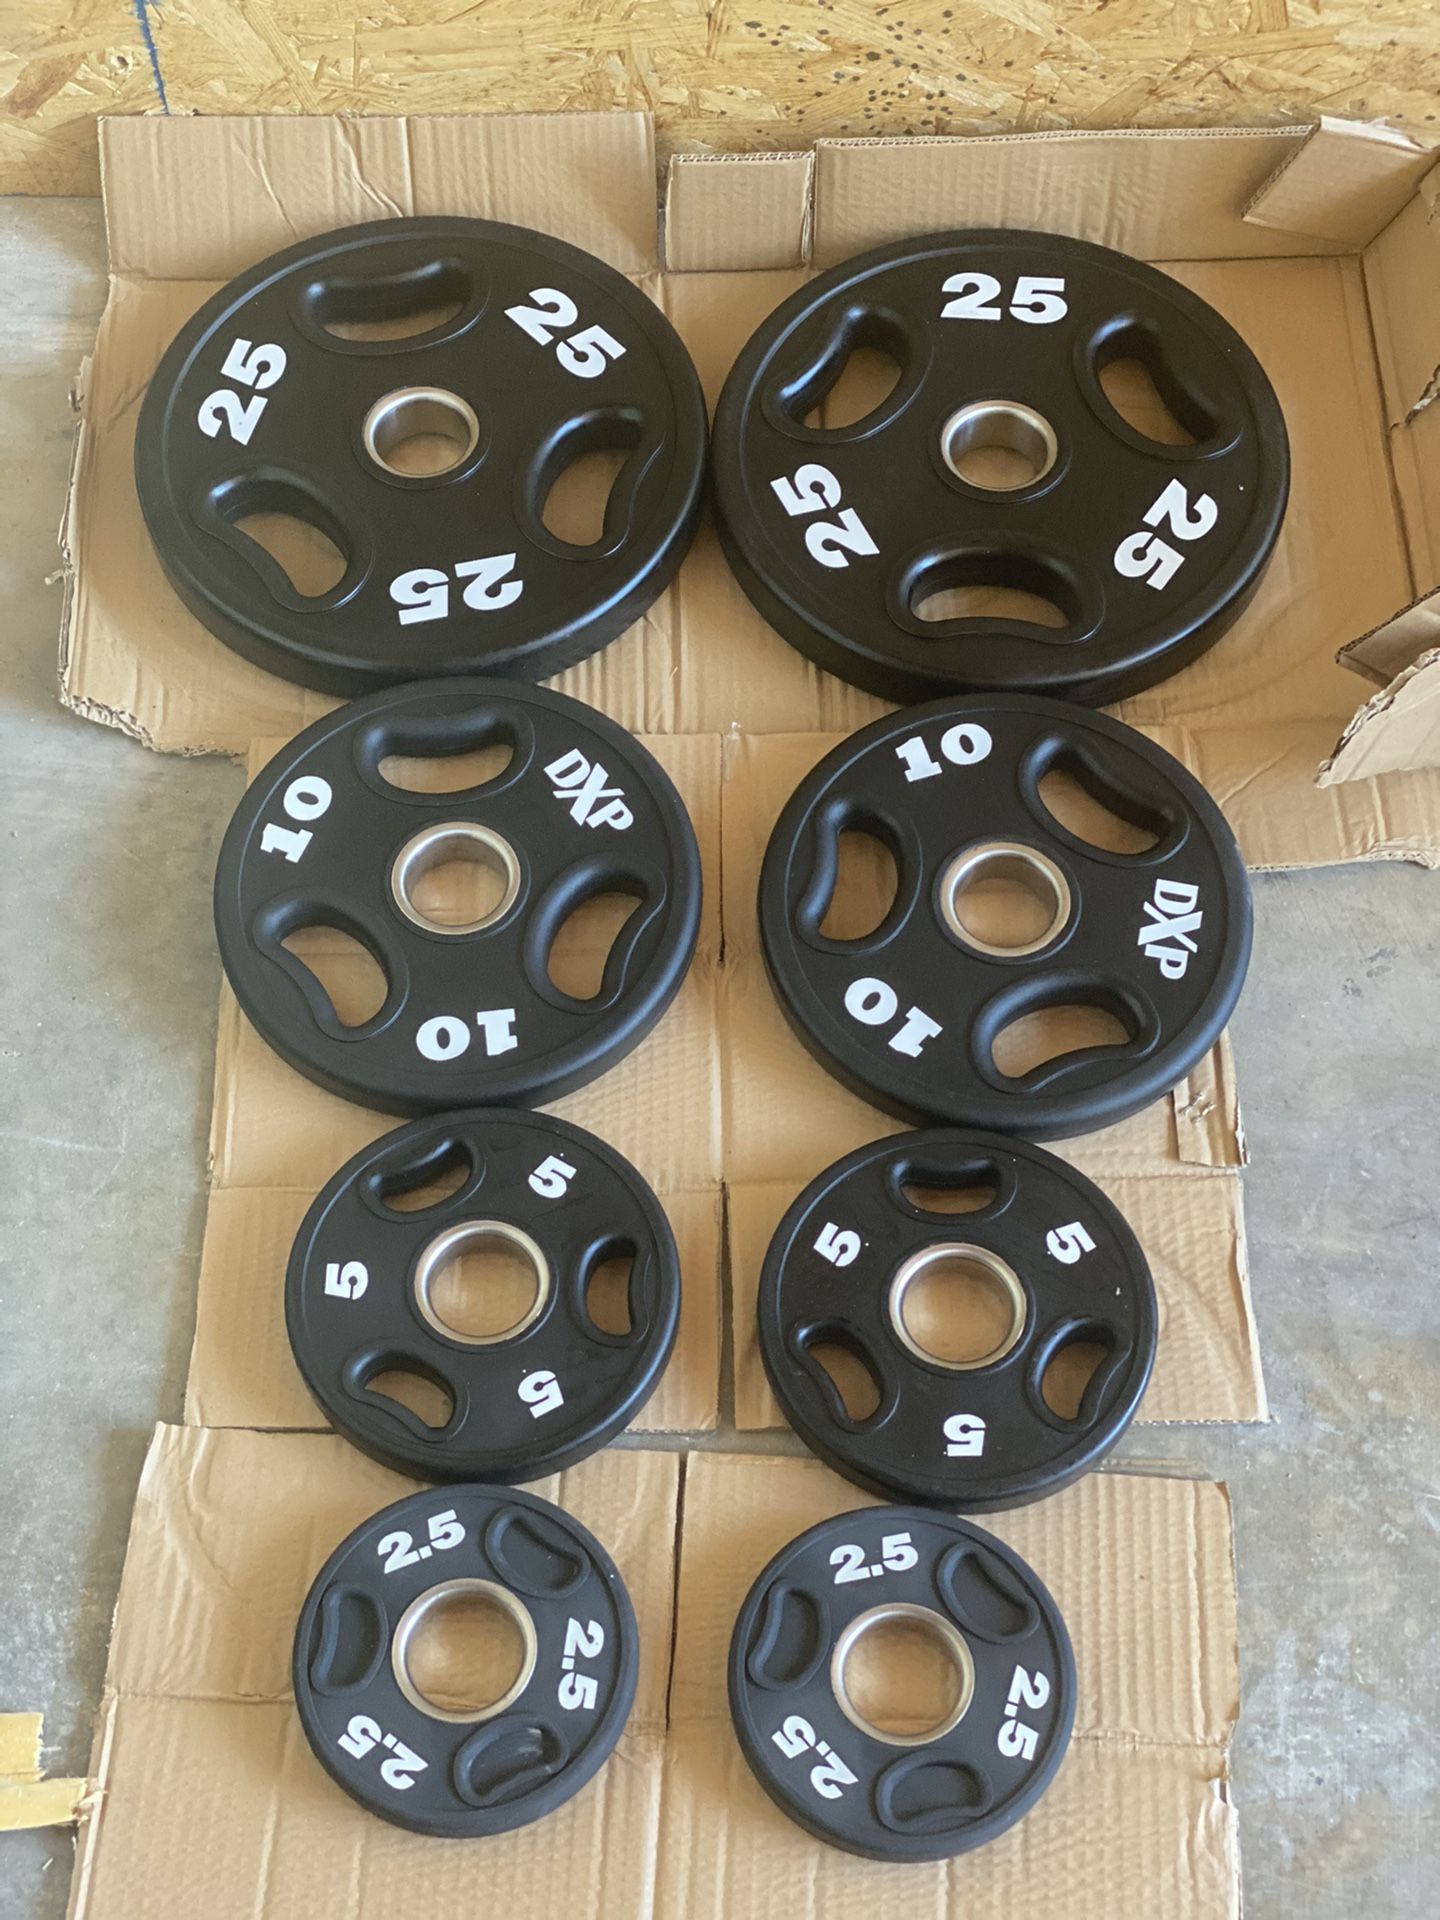 Weights commercial urethane plate set